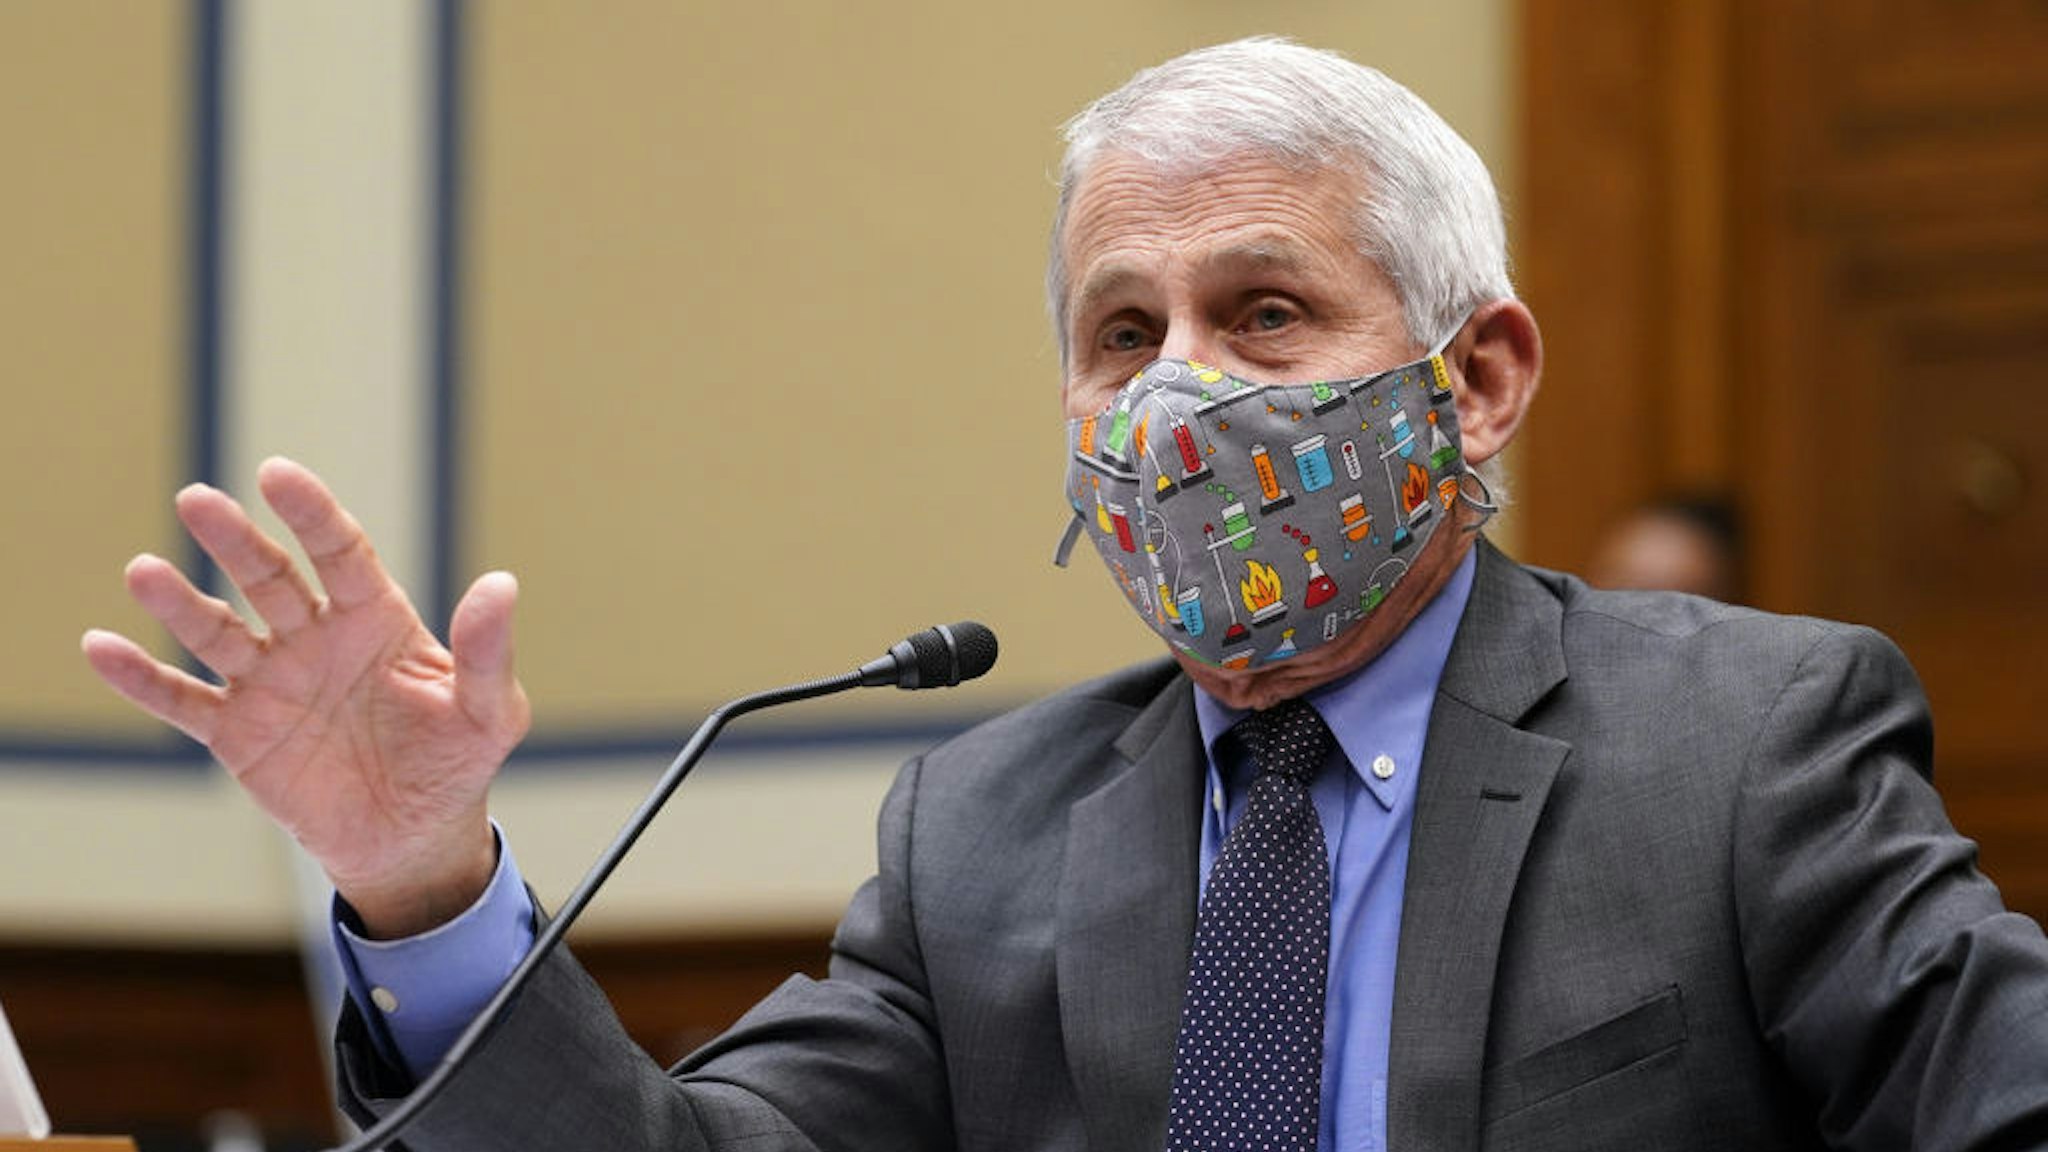 Anthony Fauci, director of the National Institute of Allergy and Infectious Diseases, speaks during a Select Subcommittee On Coronavirus Crisis hearing in Washington, D.C., U.S., on Thursday, April 15, 2021. Top U.S. health officials, set to testify Thursday at a House hearing, are likely to face questions about the government’s decision to pause use of Johnson &amp; Johnson’s Covid-19 vaccine after a small number of recipients developed severe blood clots. Photographer: Susan Walsh/AP Photo/Bloomberg